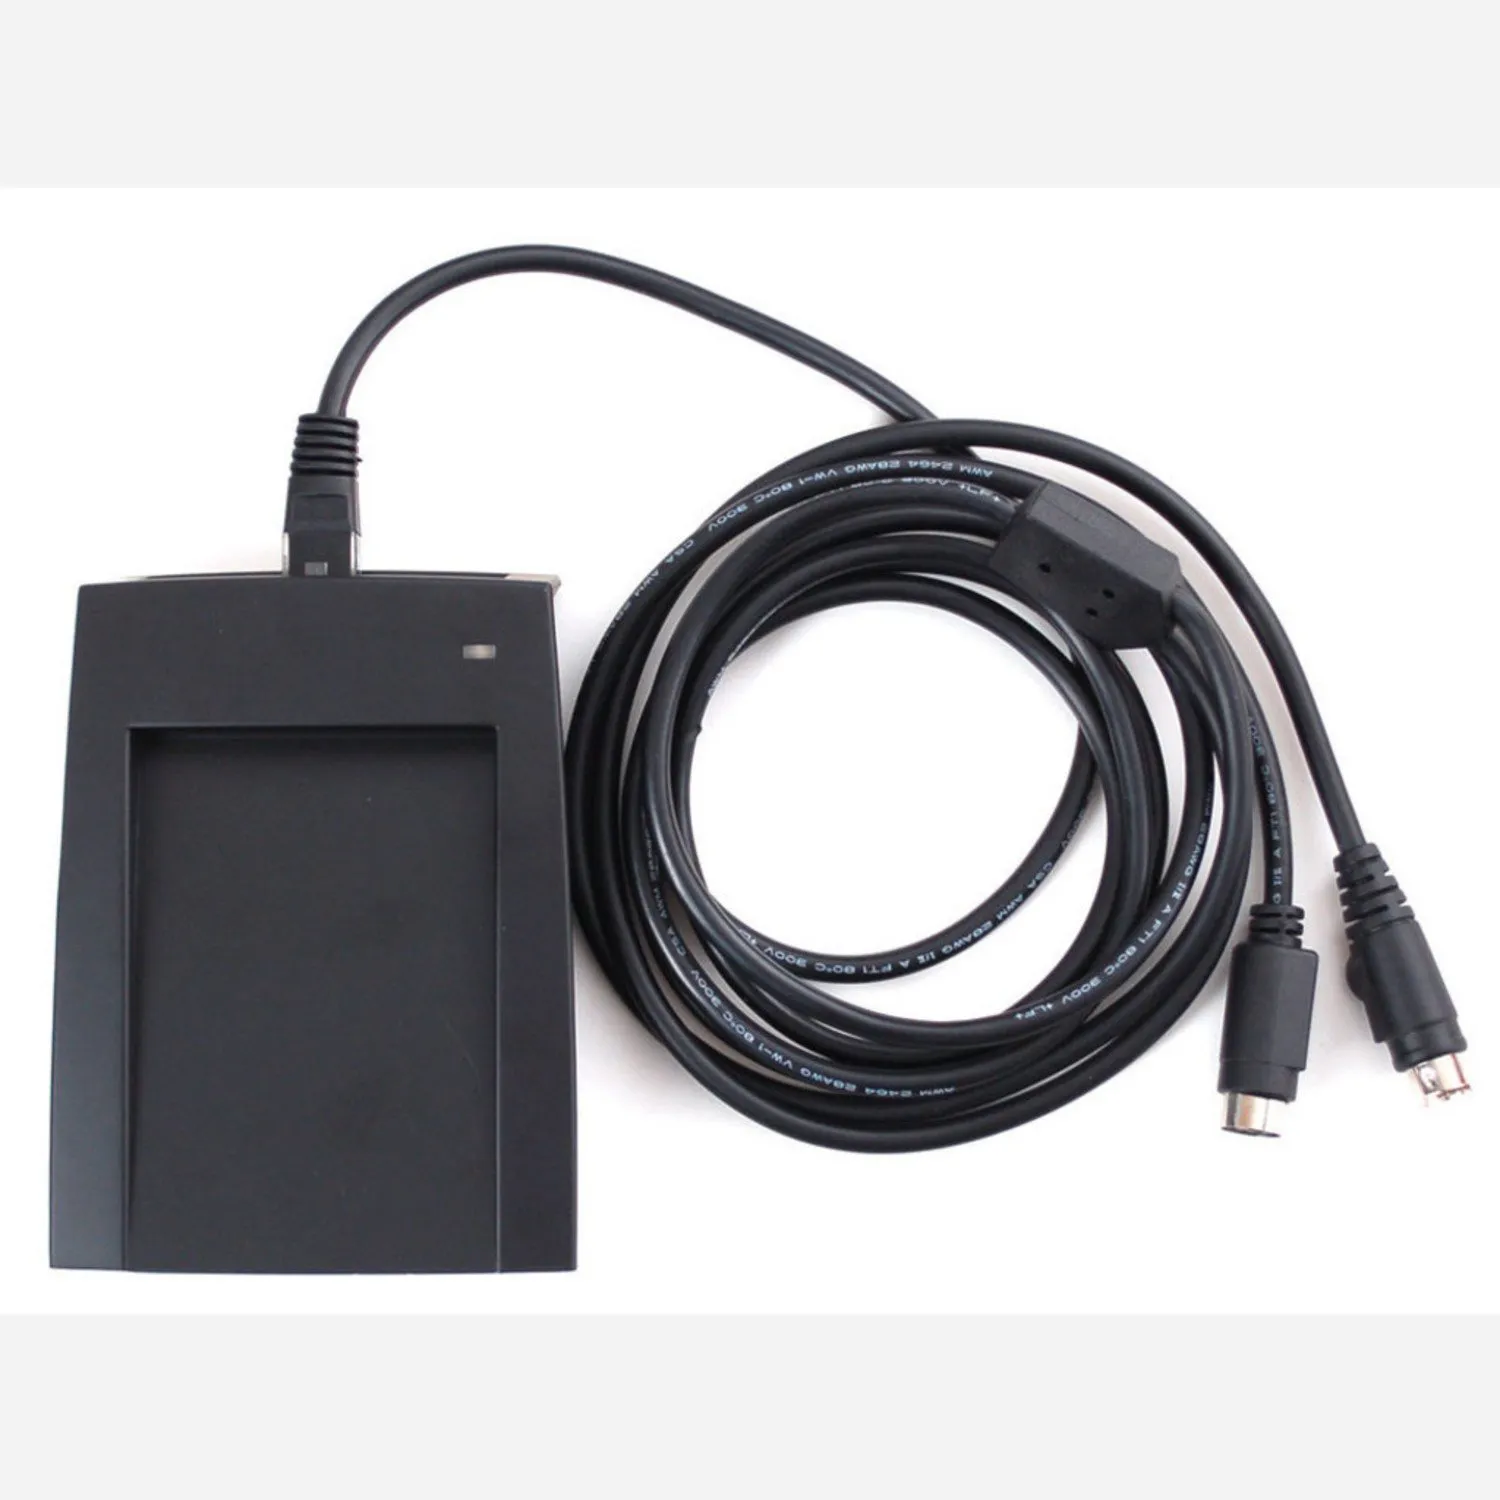 Photo of RFID RFID/NFC S50 Card Reader - PS/2 Interface